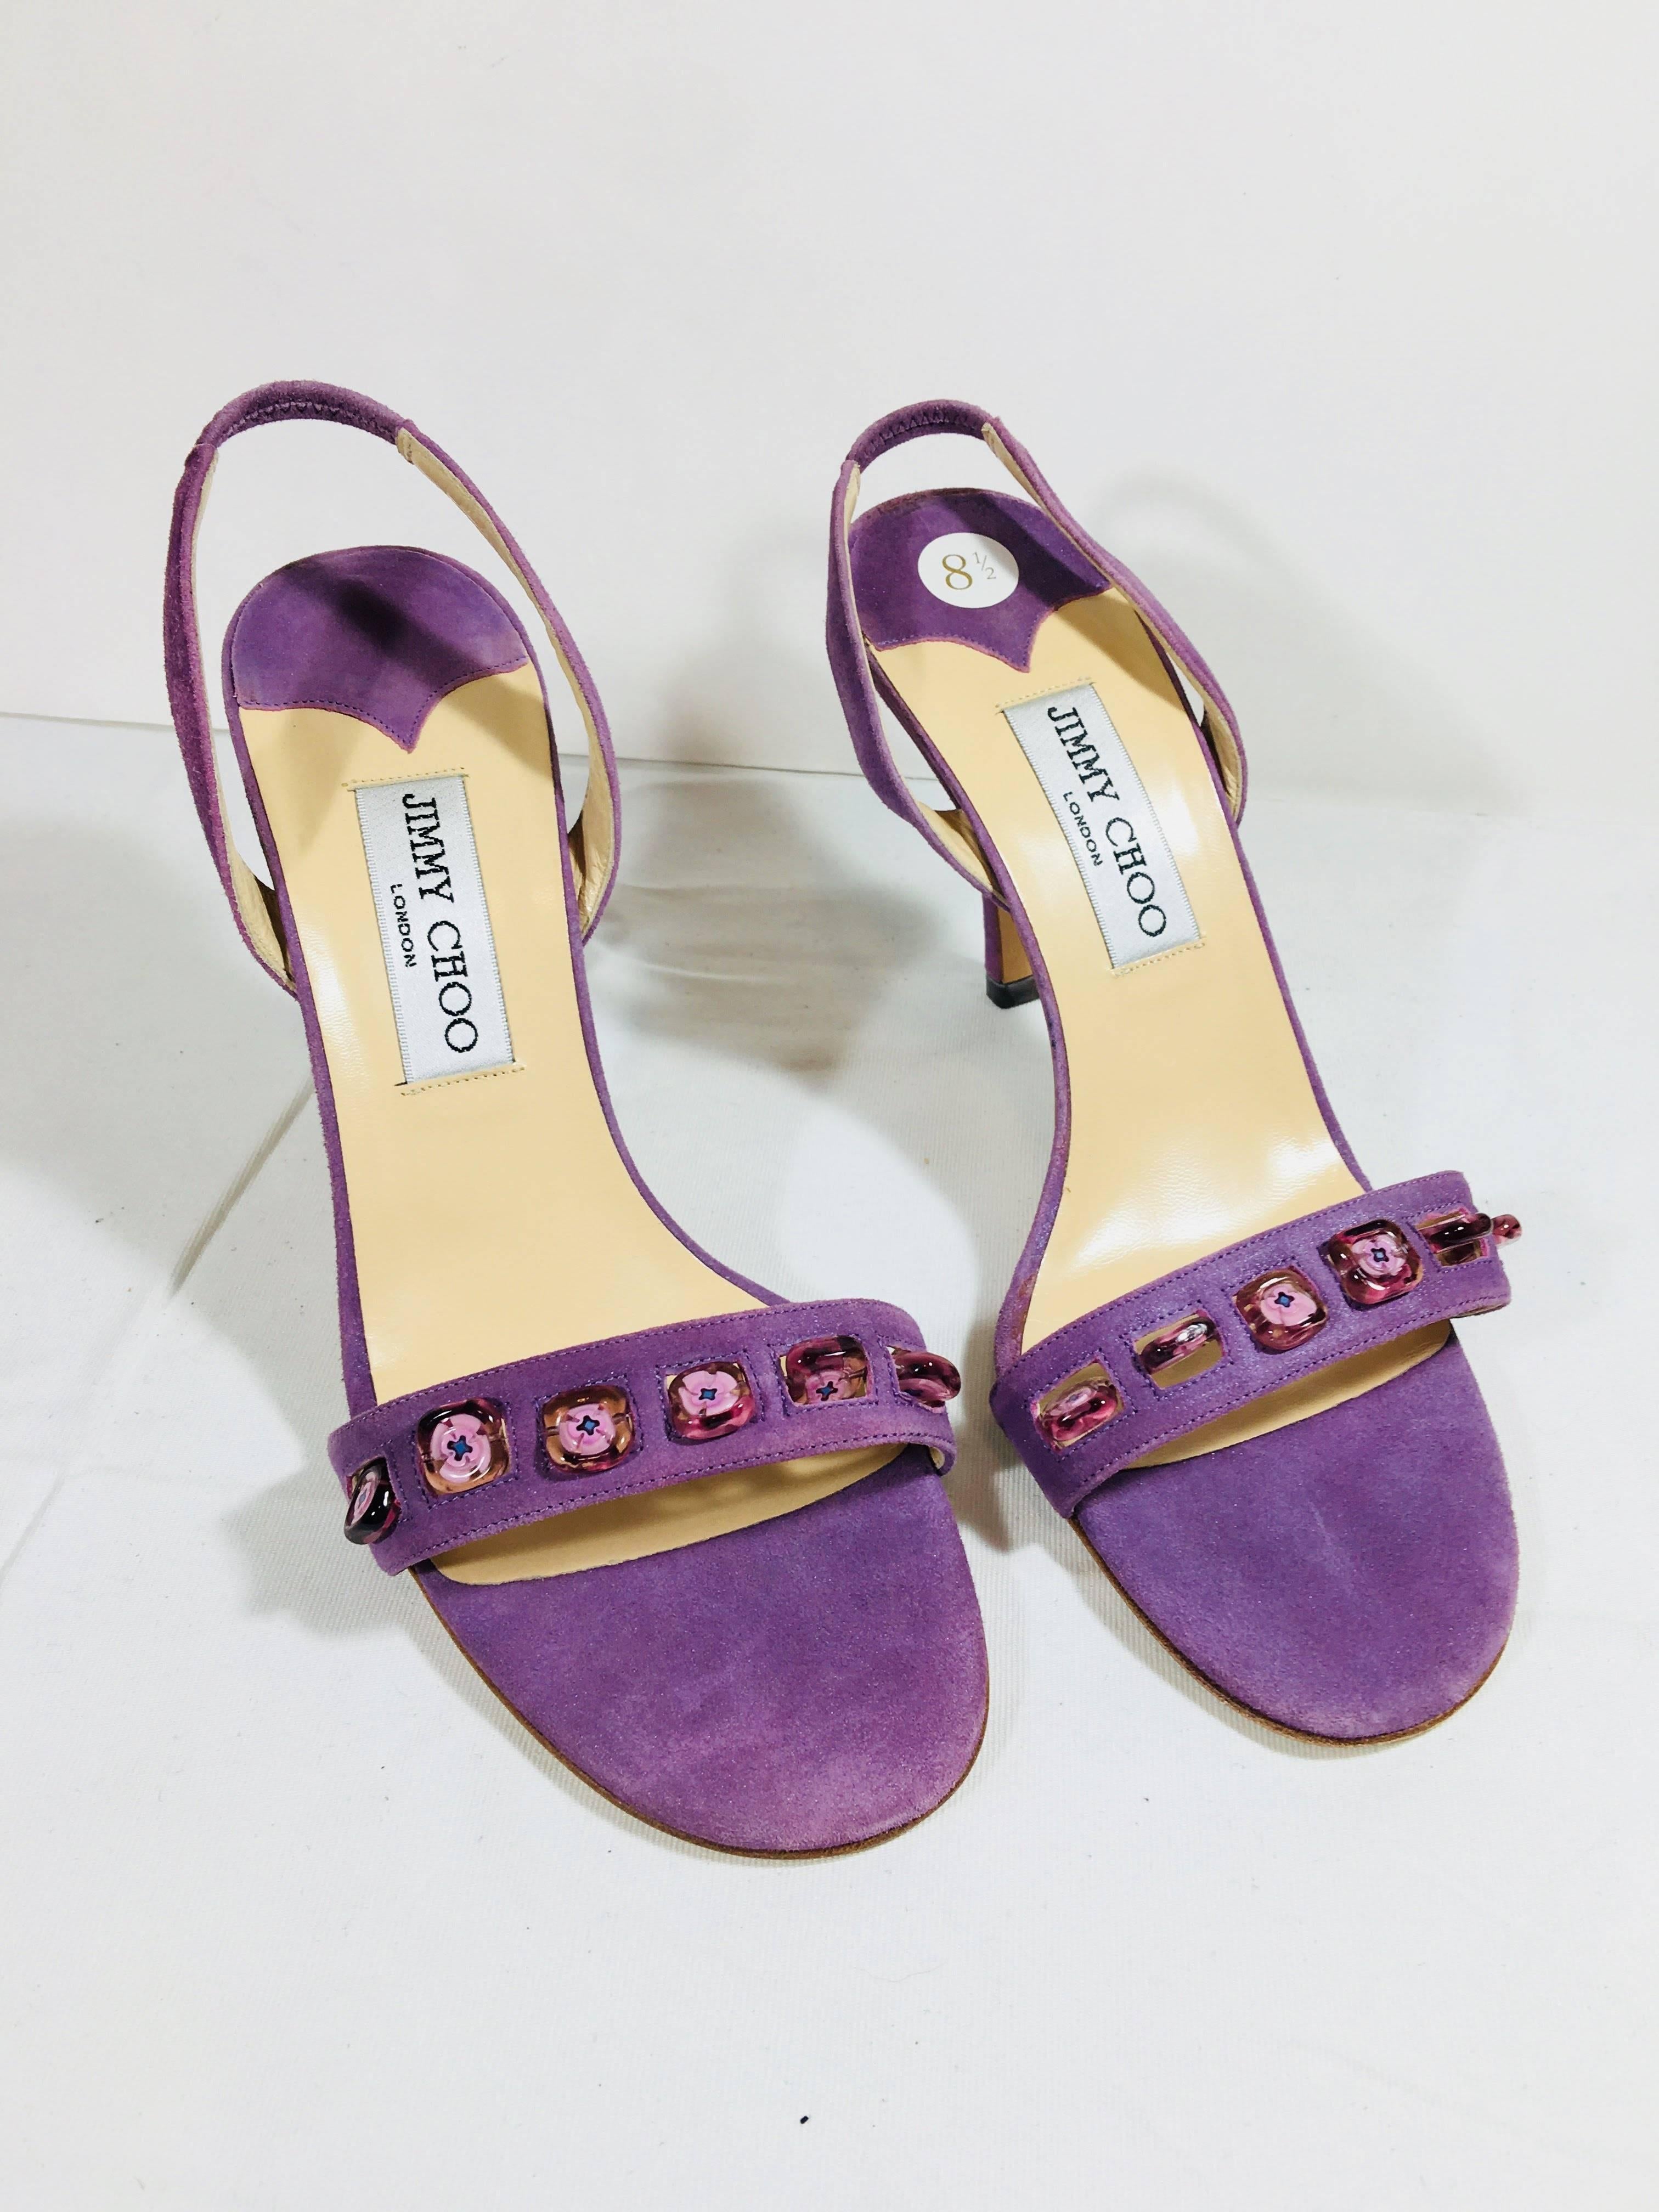 Jimmy Choo Slingback Pumps with Open Toe in Purple Suede and Beaded Detail.